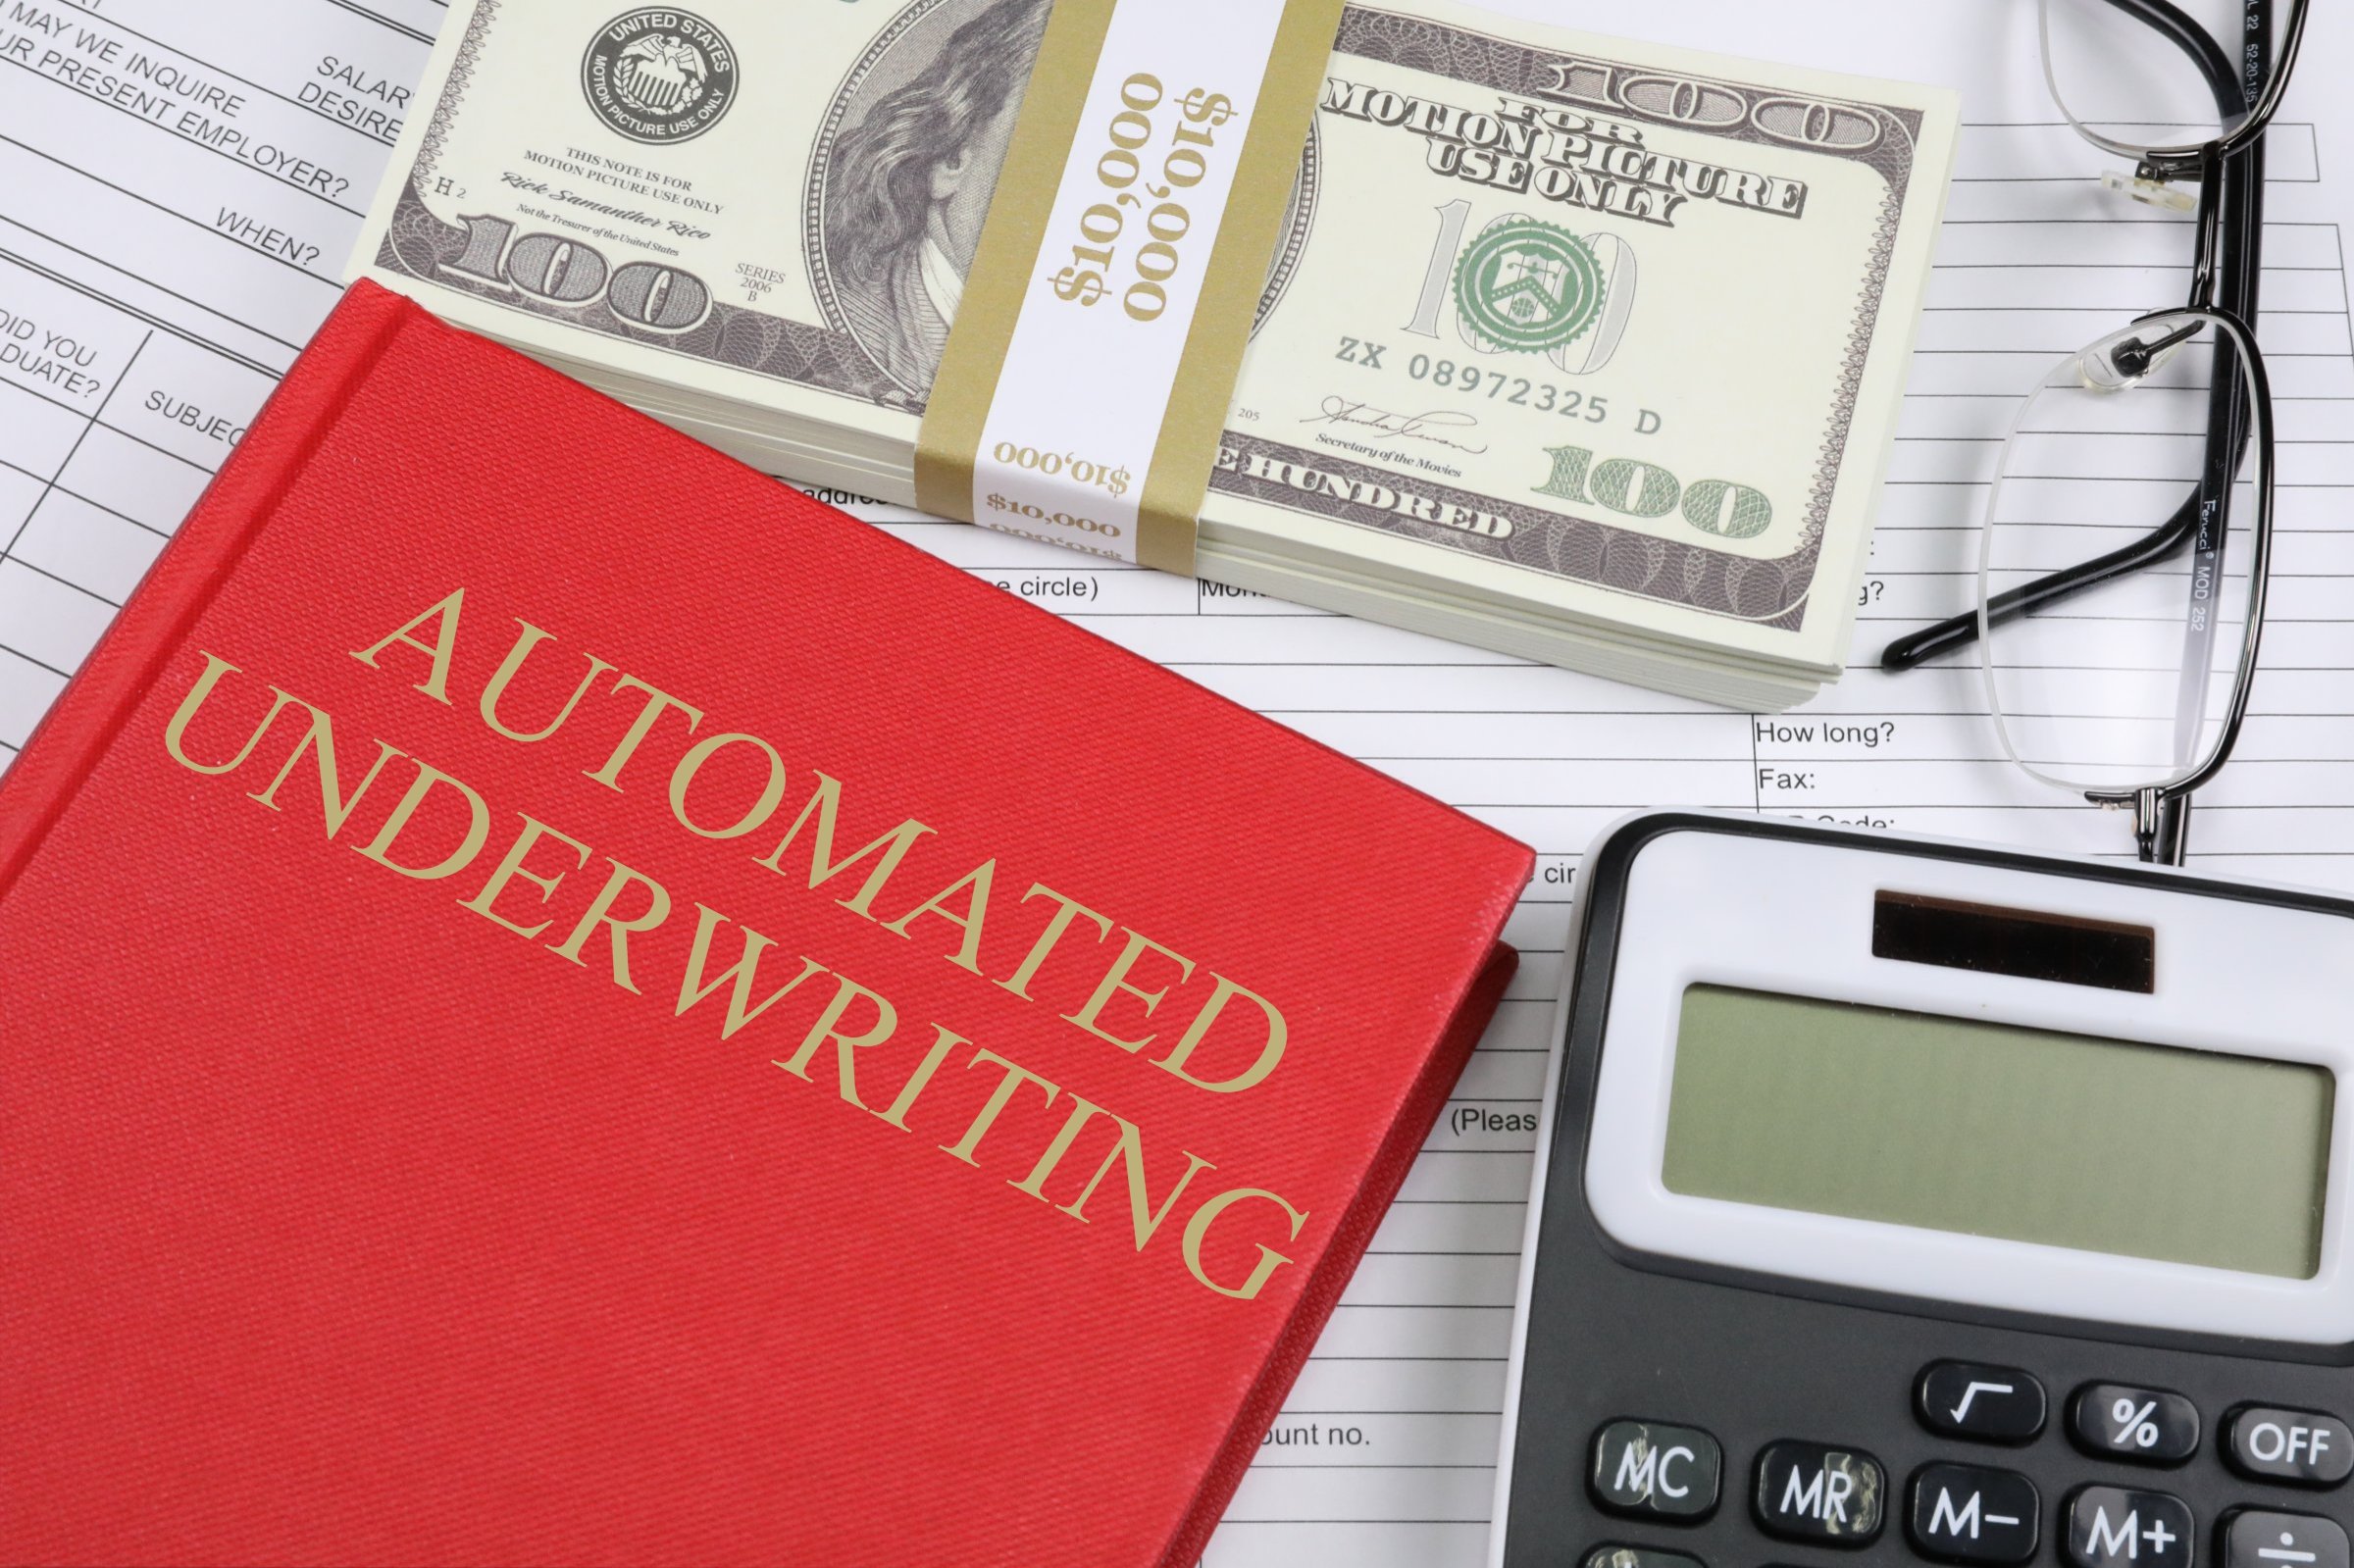 Automated Underwriting - Free of Charge Creative Commons Financial 8 image